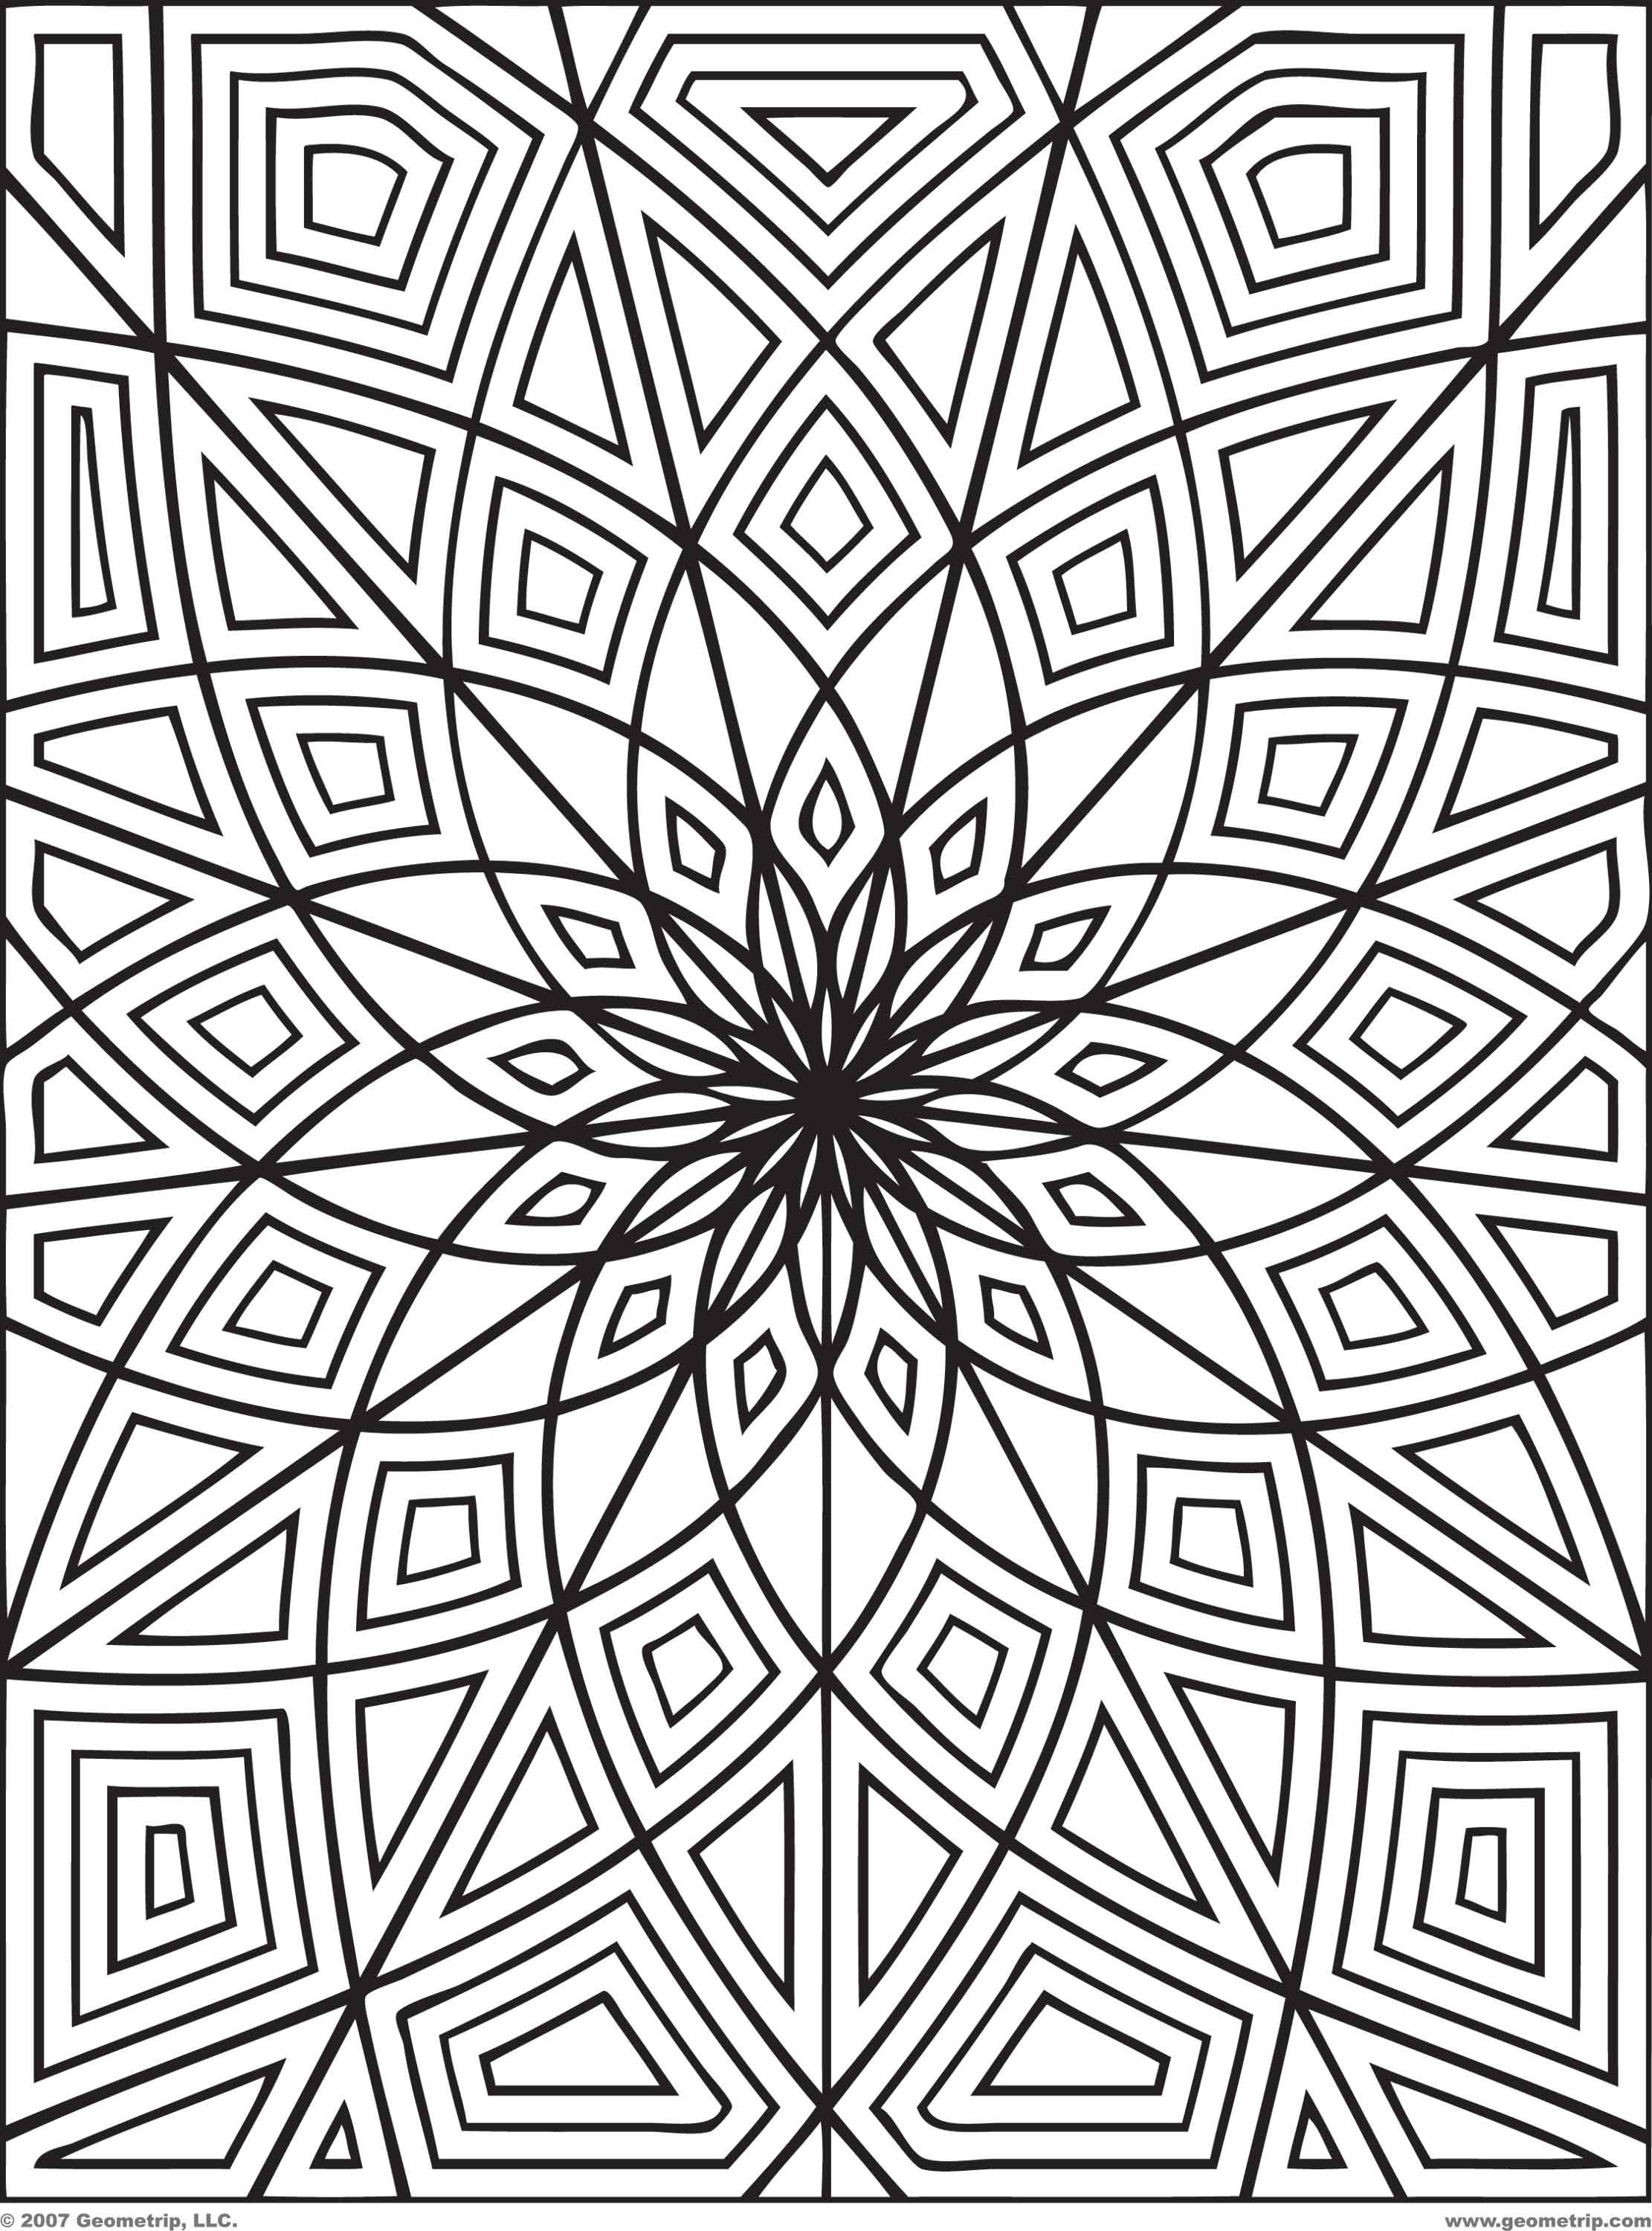 Printable Coloring Pages Adults Free
 Free Printable Adult Coloring Pages Awesome Image 14